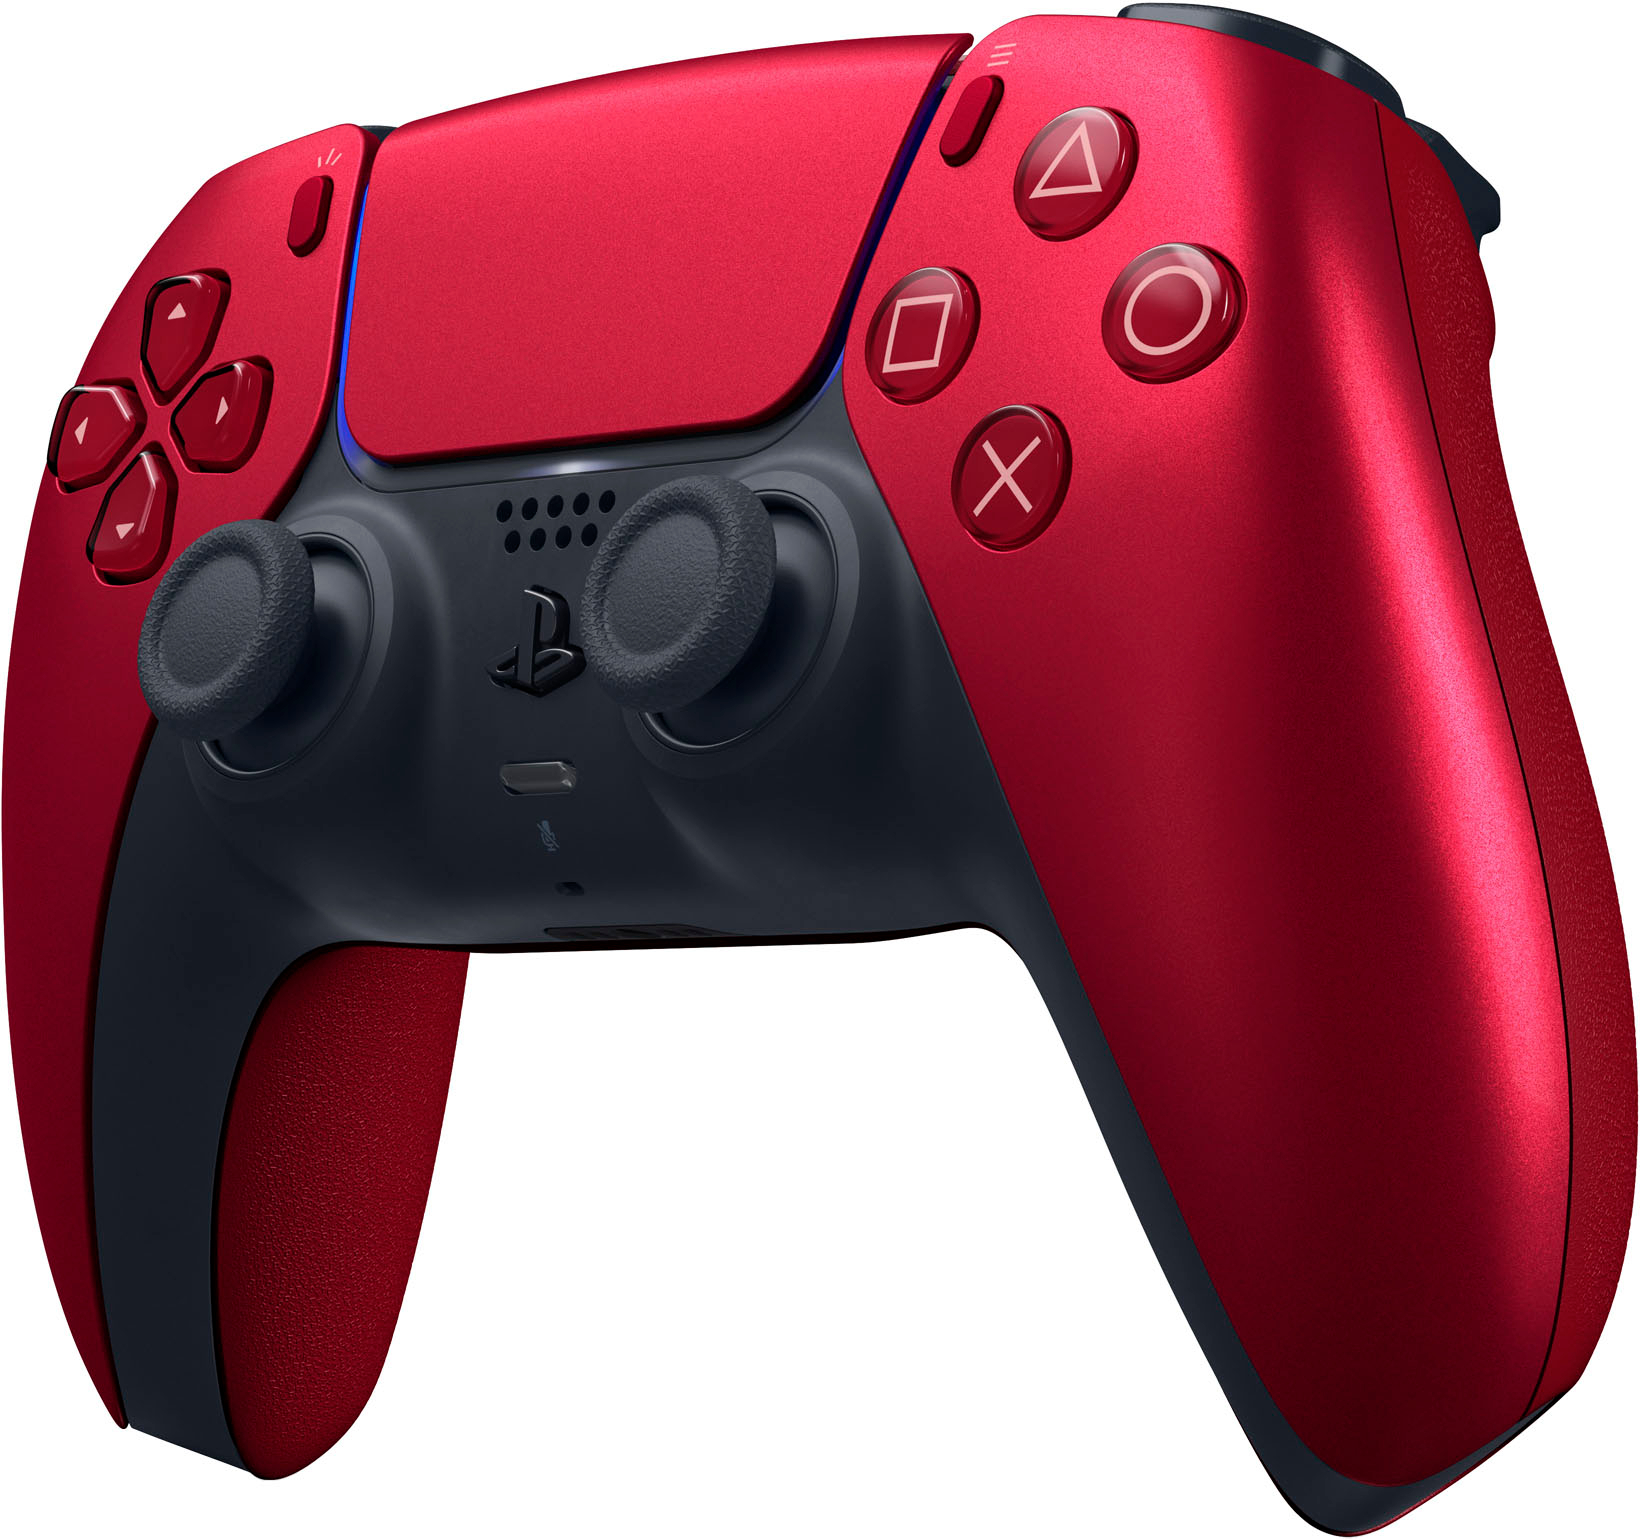 Angle View: Sony - PlayStation 5 - DualSense Wireless Controller - Volcanic Red